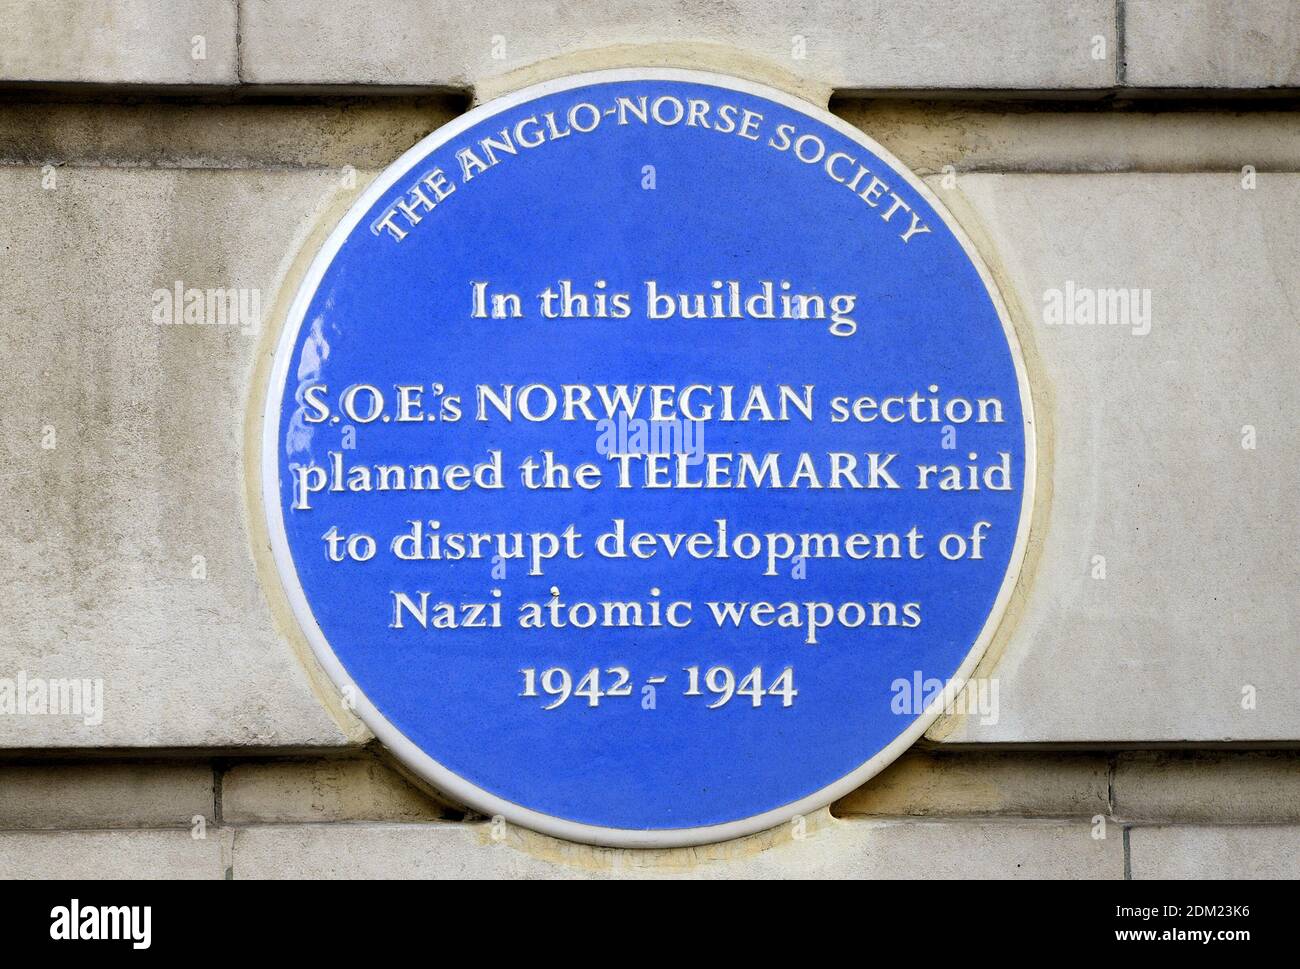 London, UK. Commemorative plaque. Chiltern Court, Baker Street: 'In this building S.O.E.'s Norwegian section planned the Telemark raid to disrupt deve Stock Photo